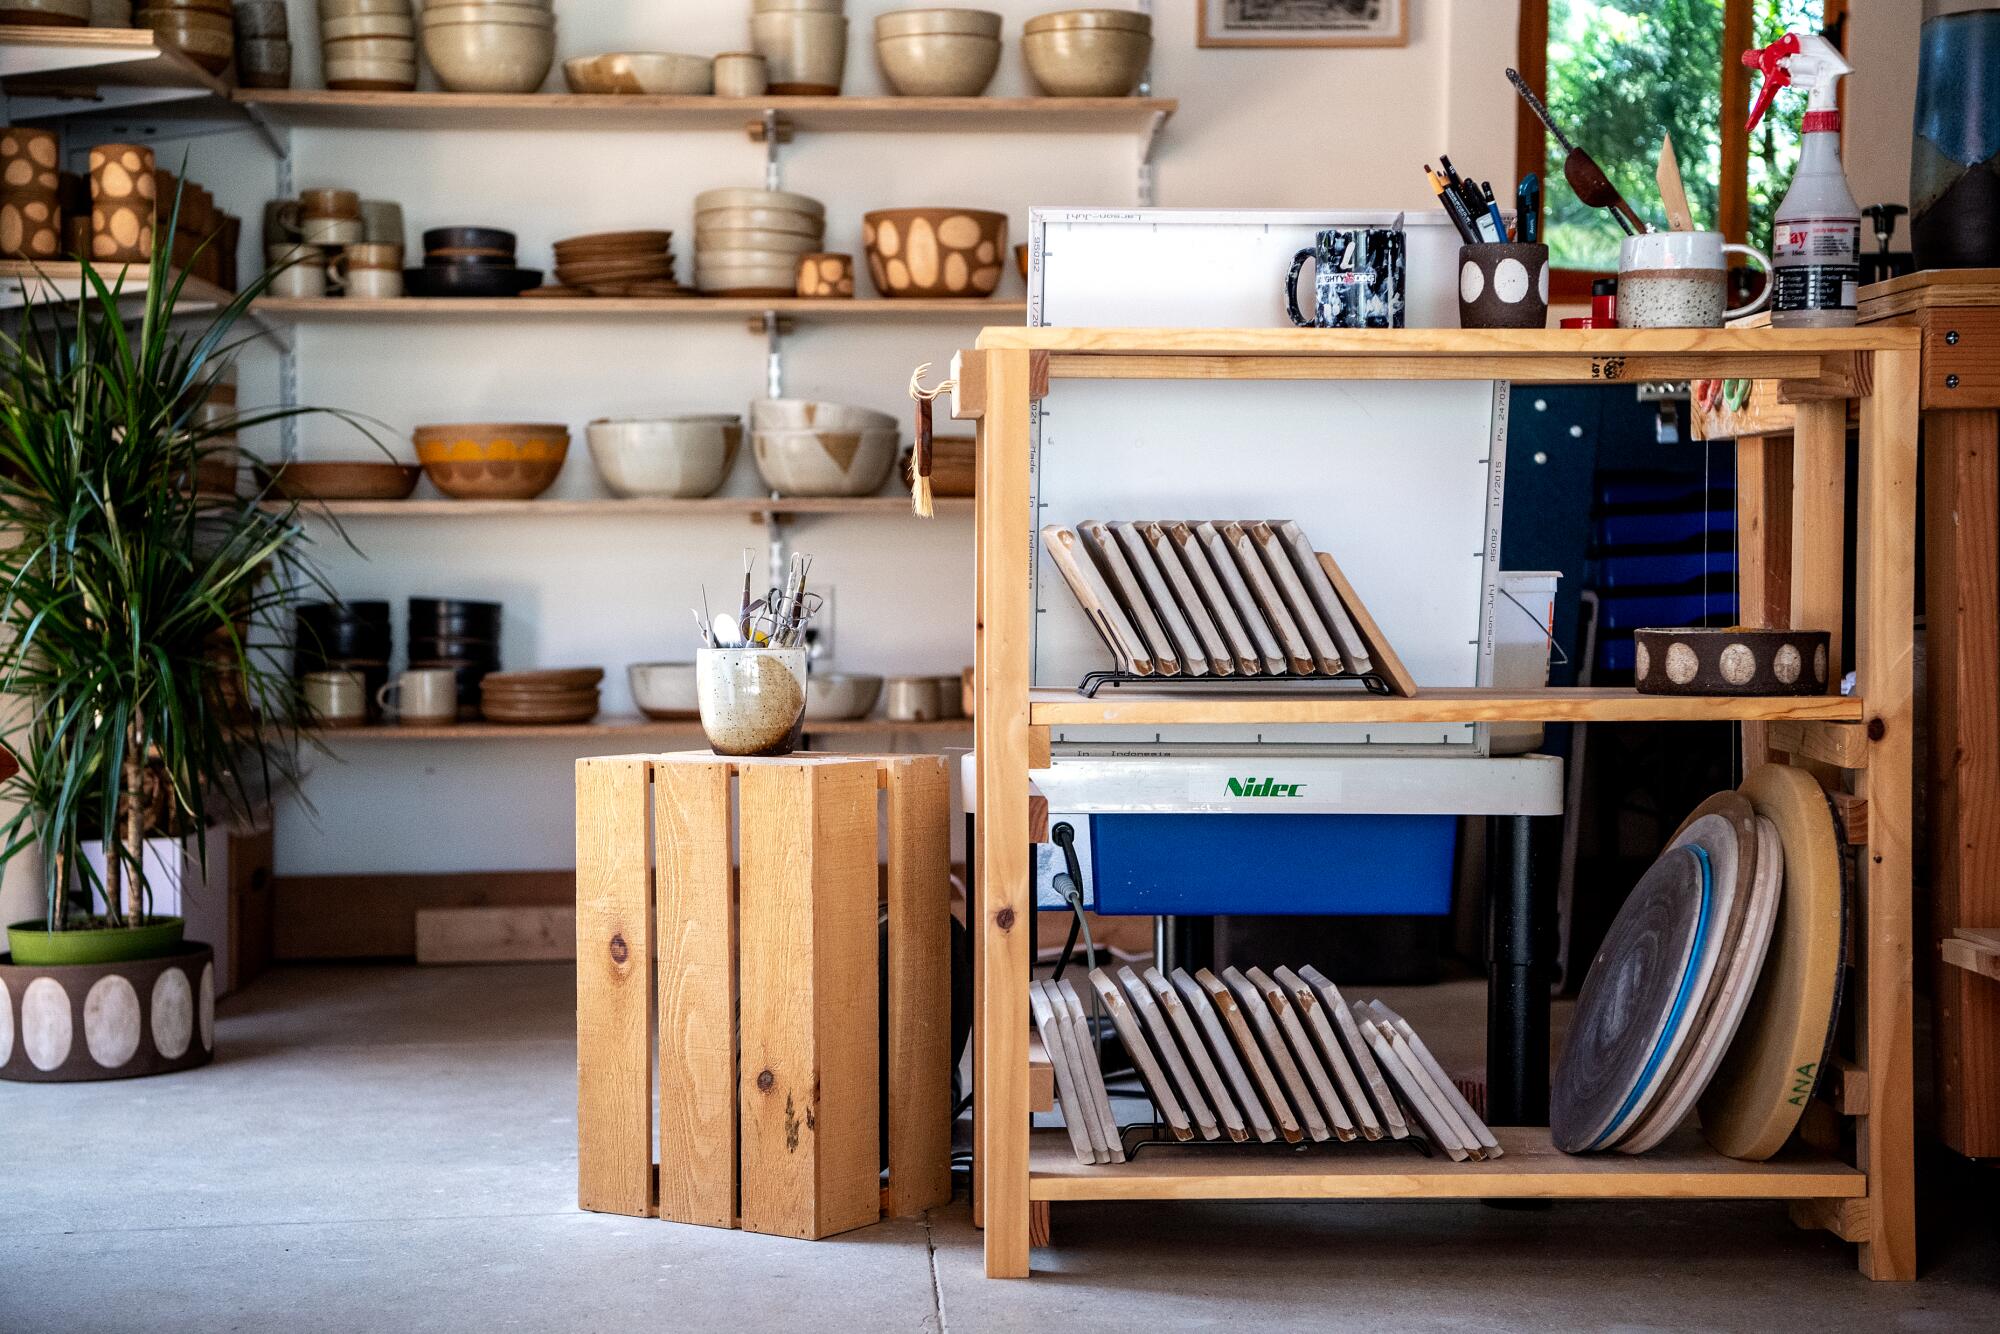 Shelving with handcrafted pots and bowls.